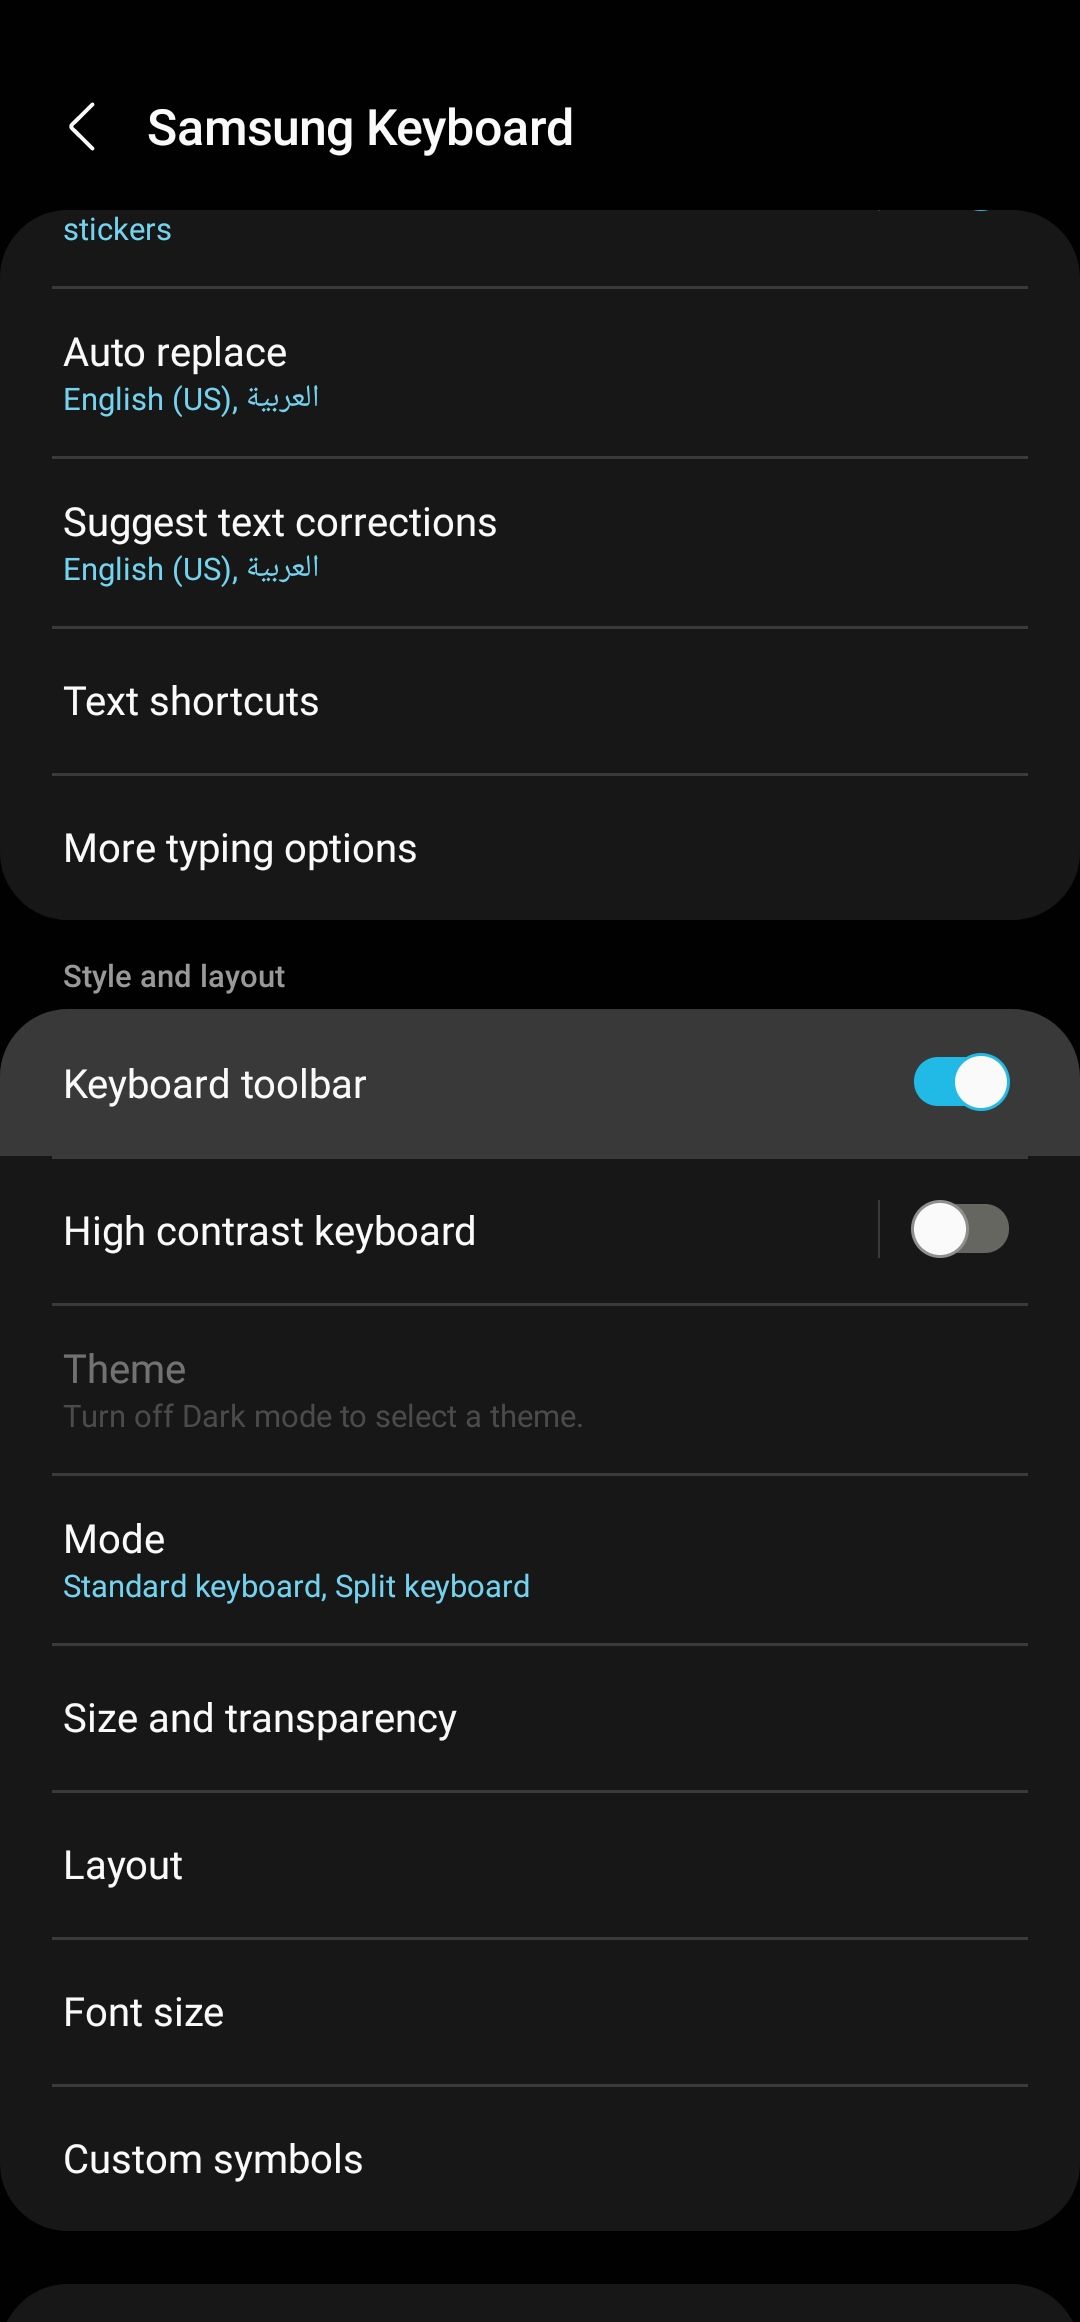 11 simple Samsung Keyboard tips to improve your speed and accuracy